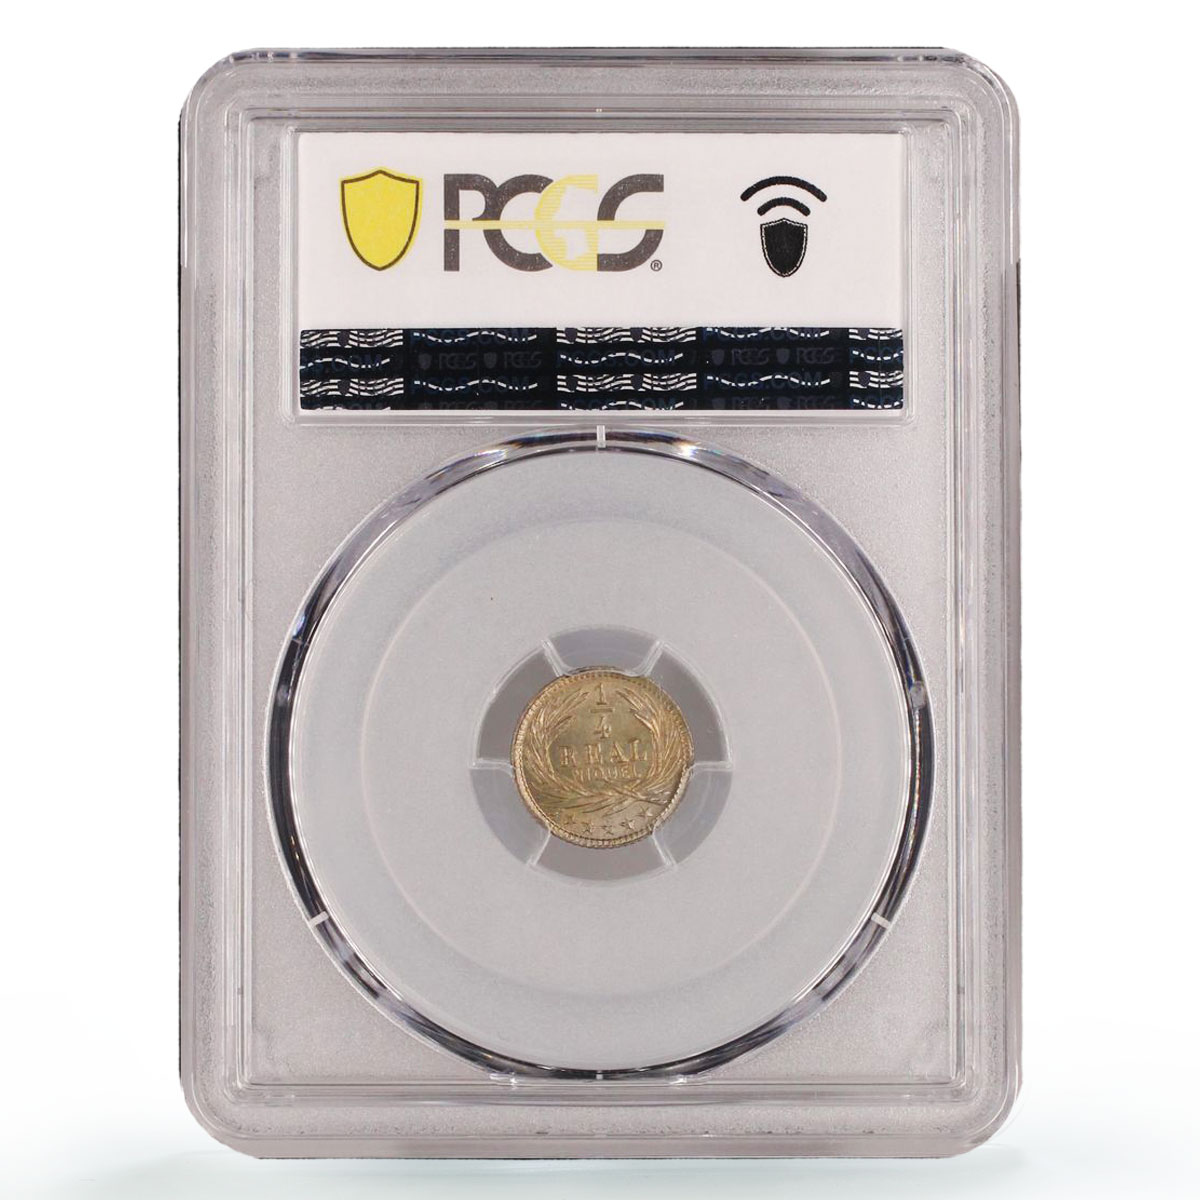 Guatemala 1/4 real Regular Coinage Radiant Sun KM-175 MS64 PCGS CuNi coin 1900